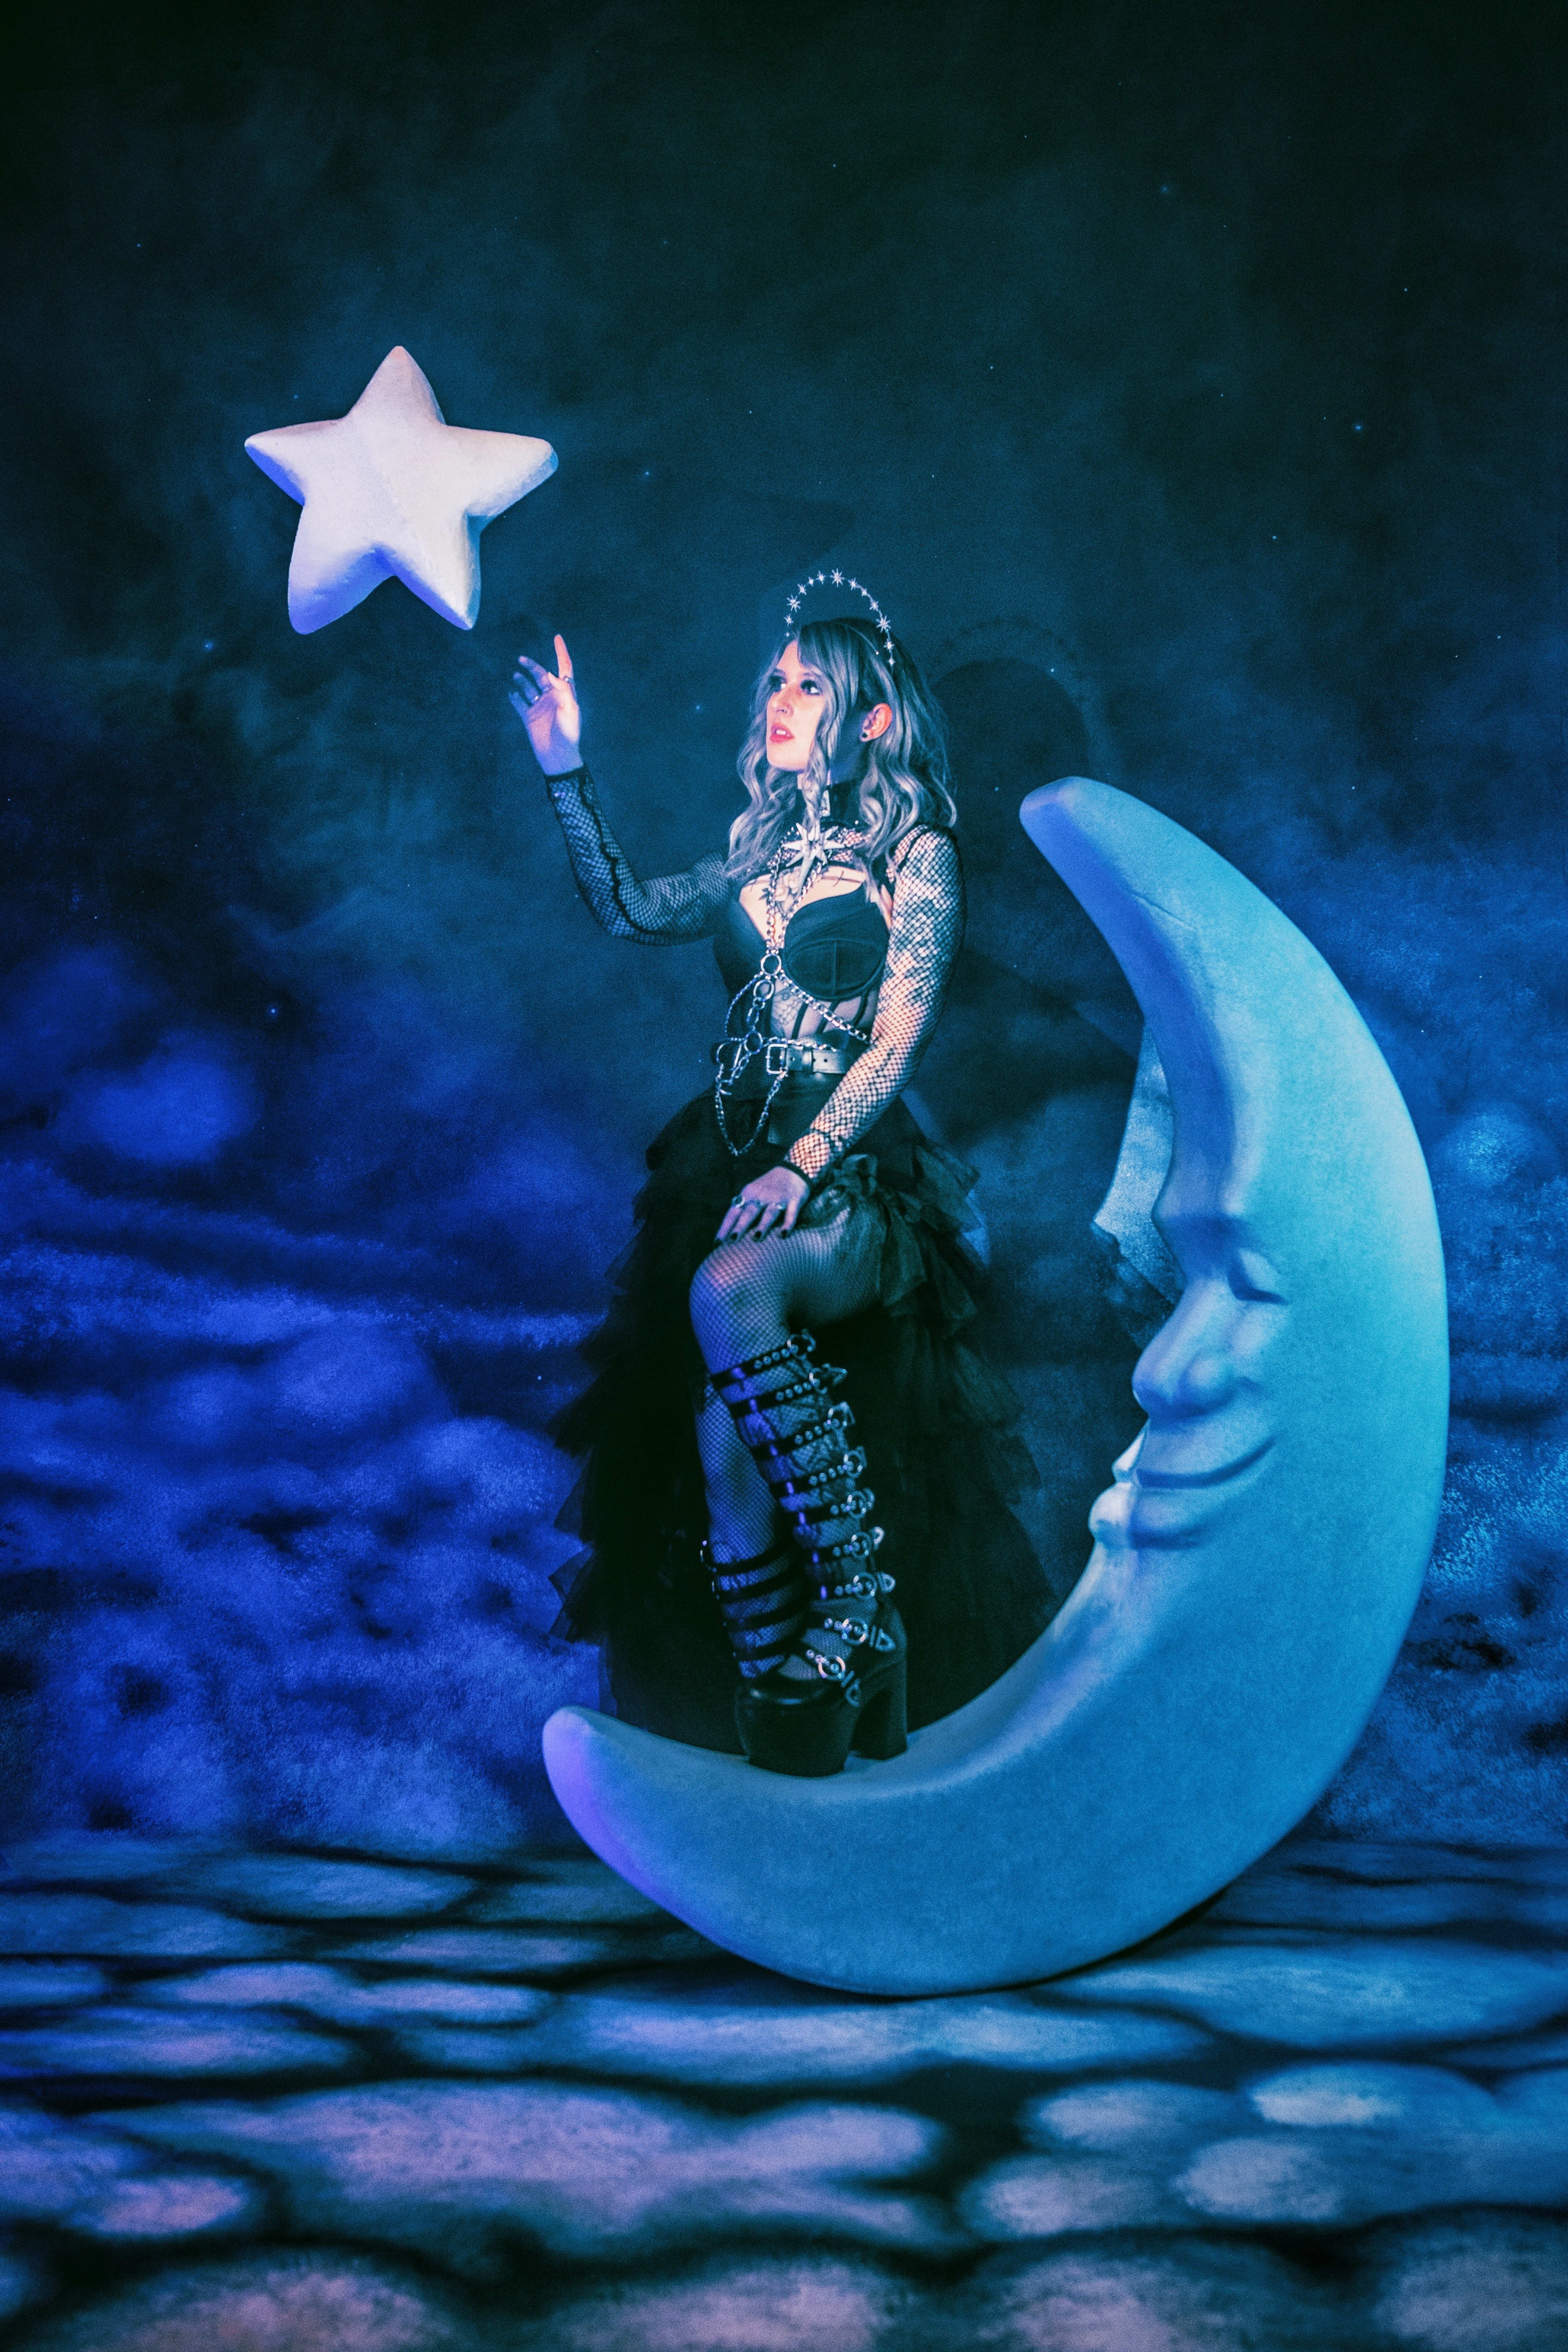 A fashion photoshoot featuring a woman reaching to a star while sitting on the blue-lit moon.